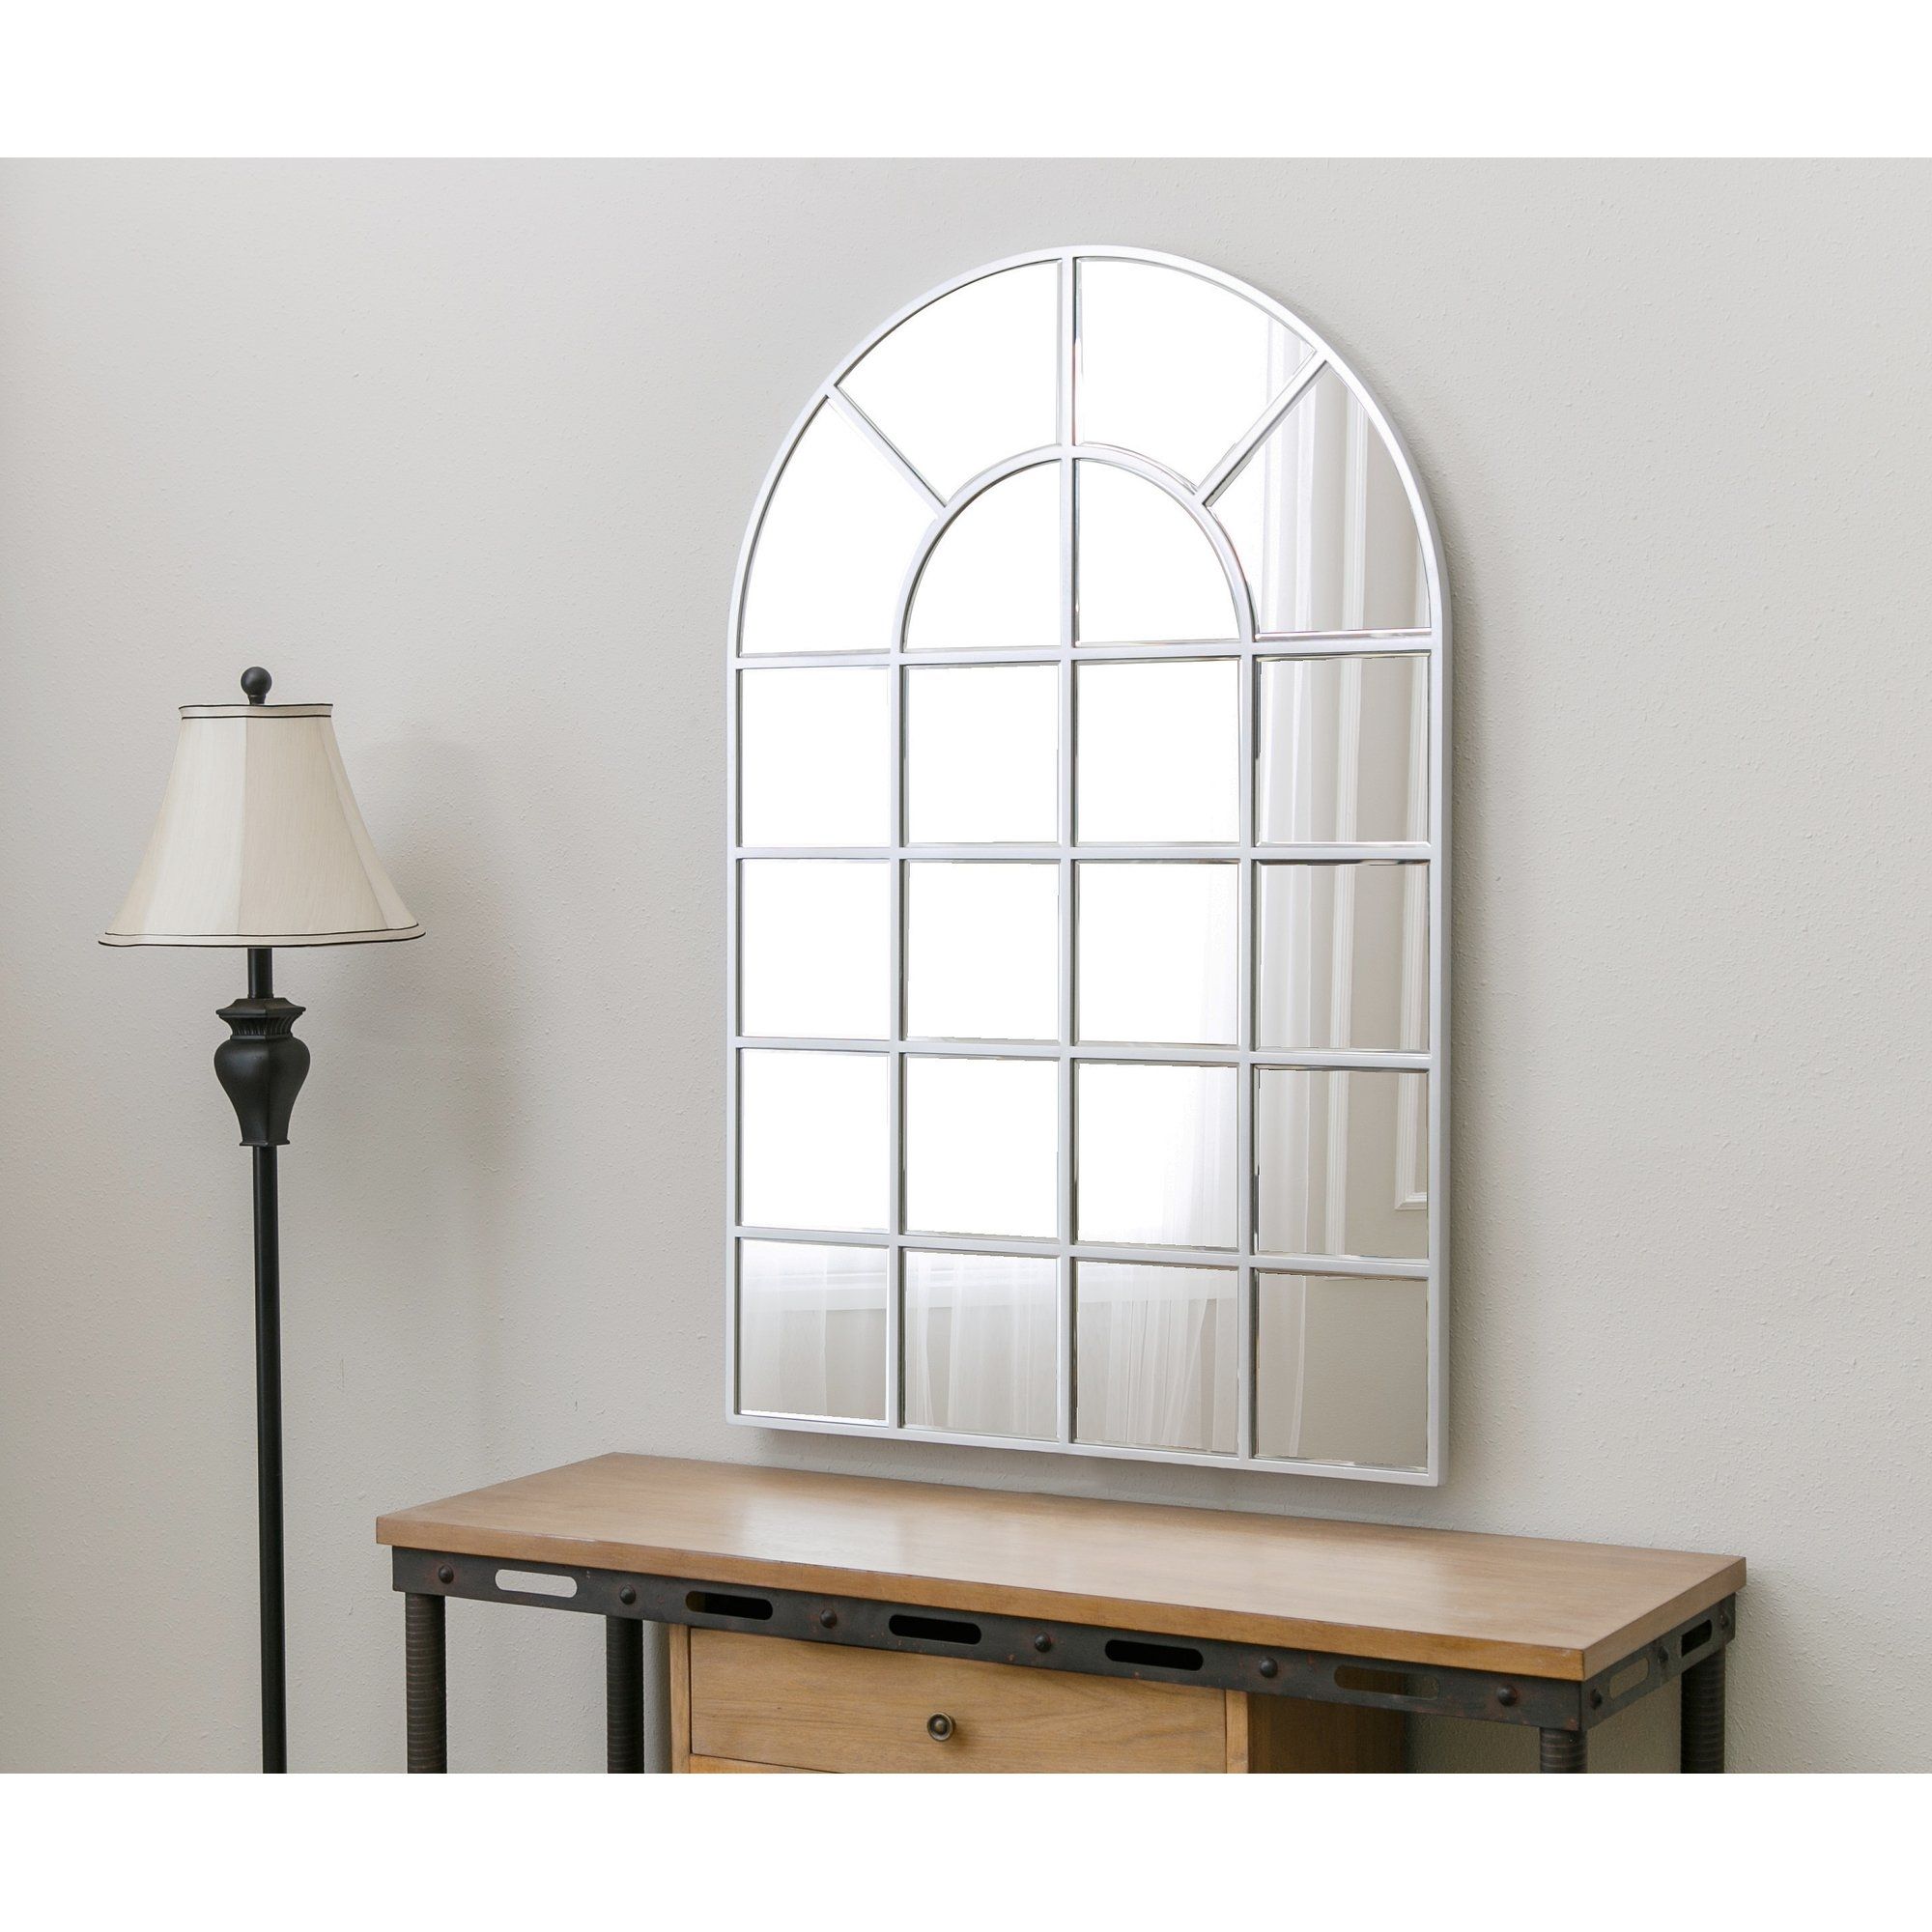 Red Barrel Studio Arched Wall Mirror Reviews Wayfair For Arched Wall Mirrors (View 8 of 15)